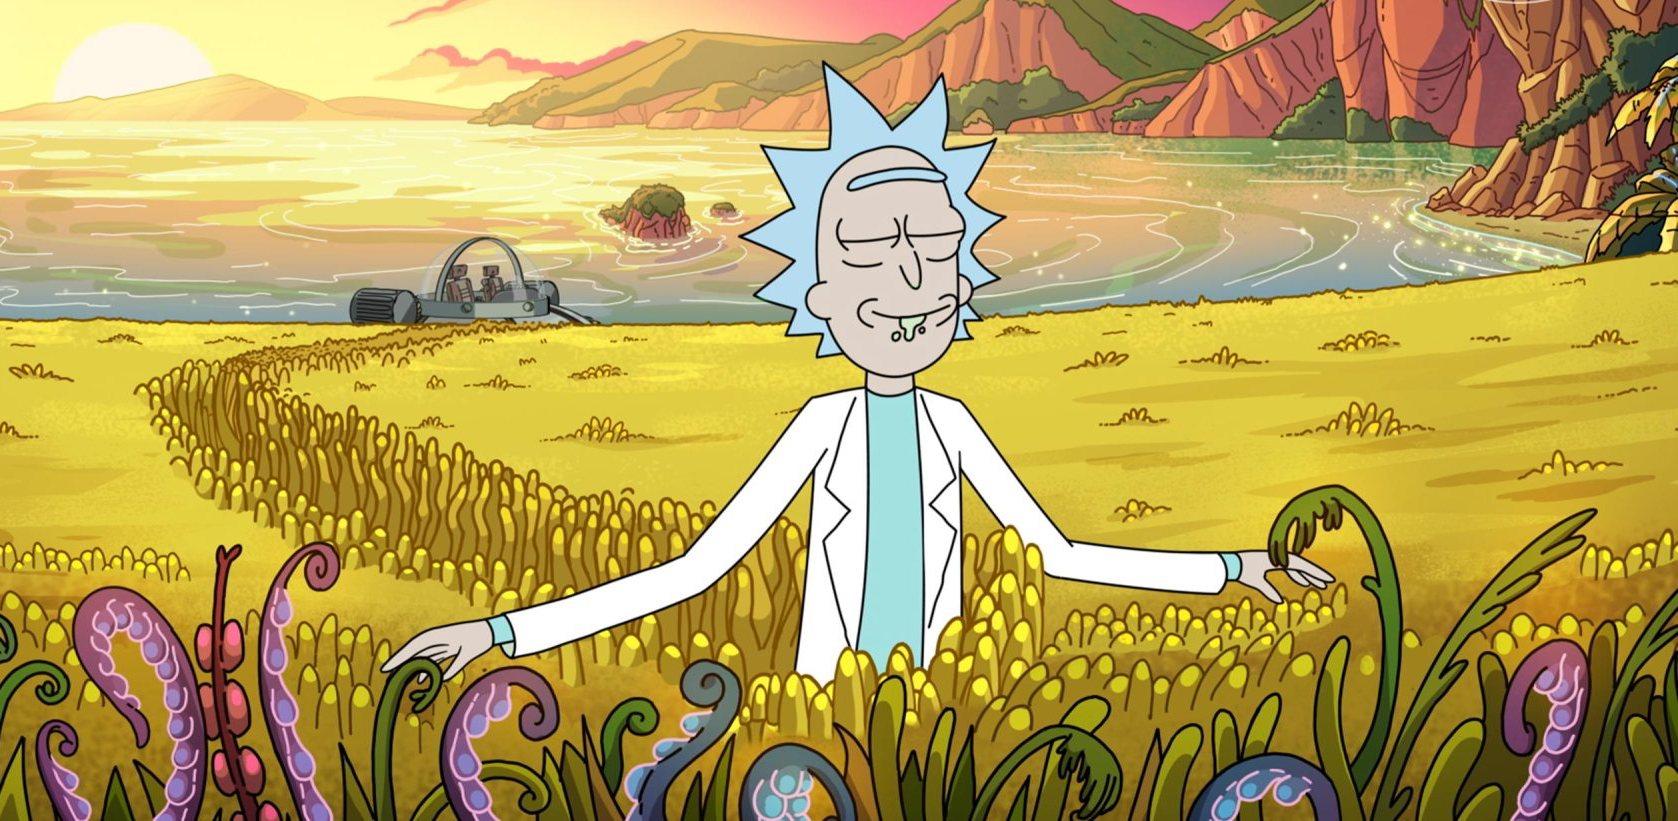 Rick In Rick And Morty Wallpapers